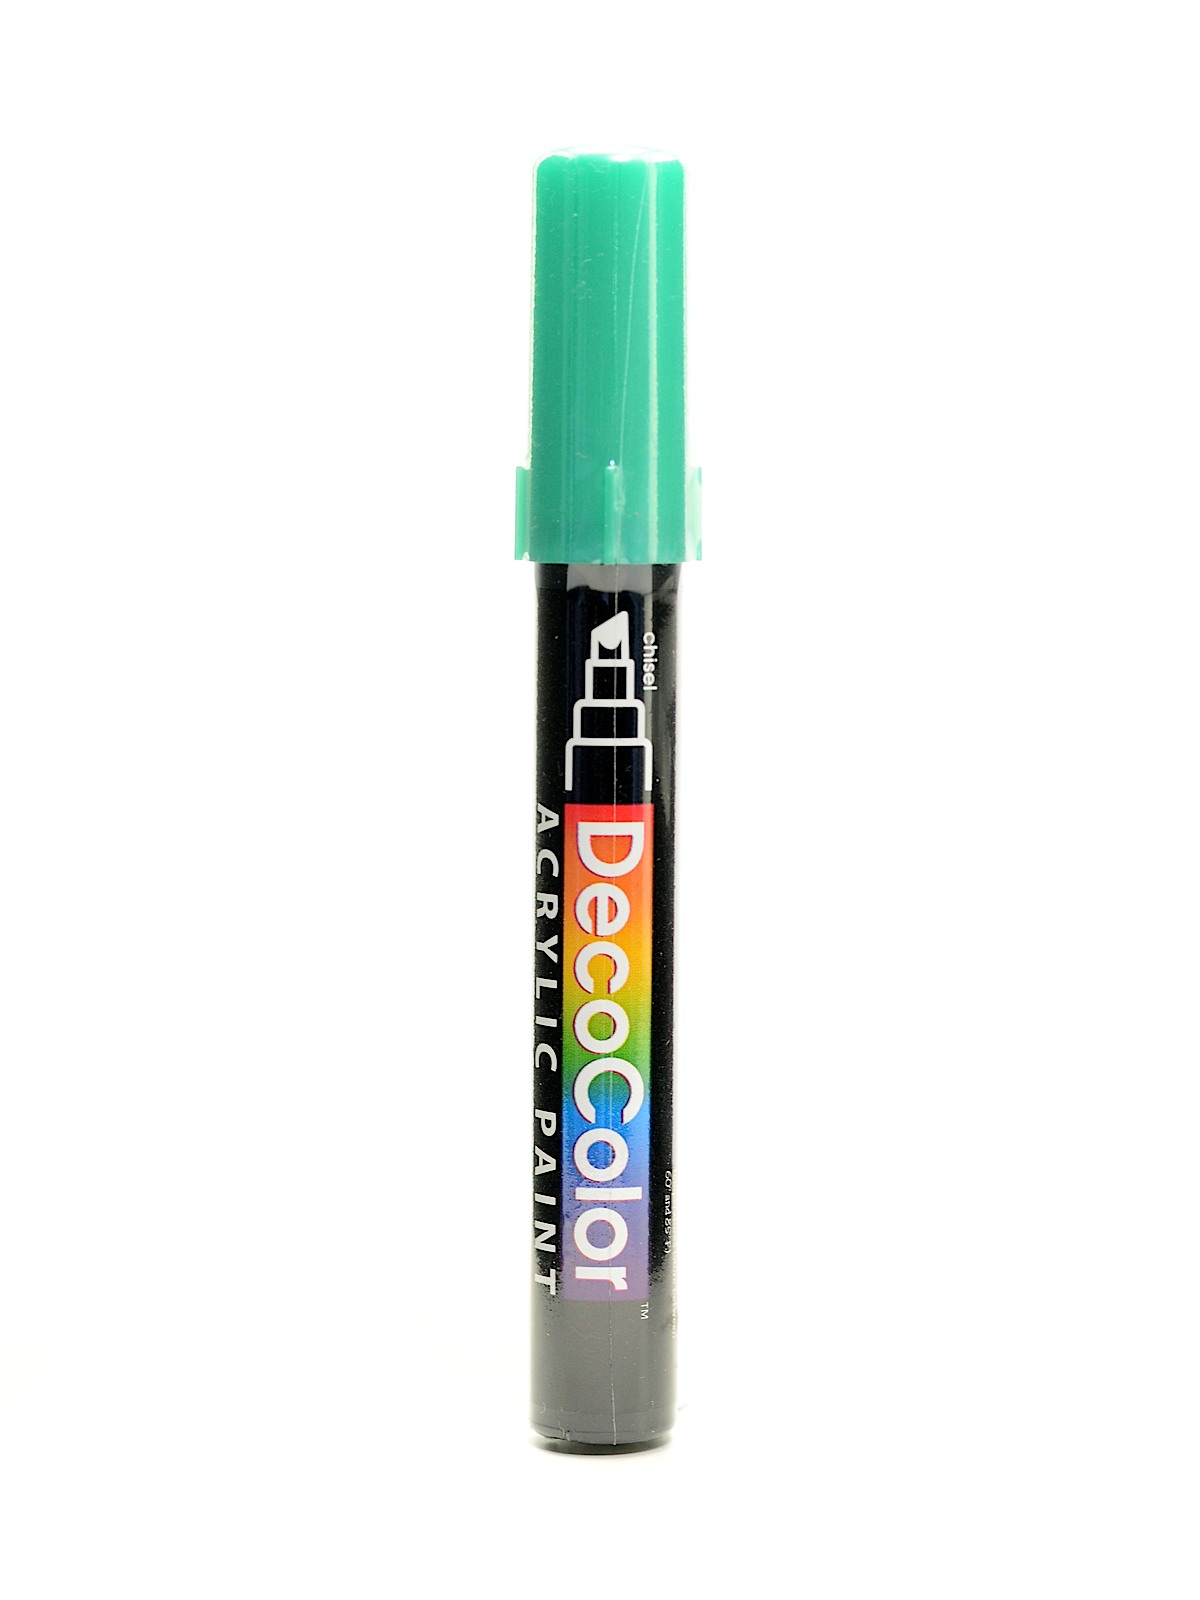 Decocolor Acrylic Paint Markers Metallic Green Chisel Tip